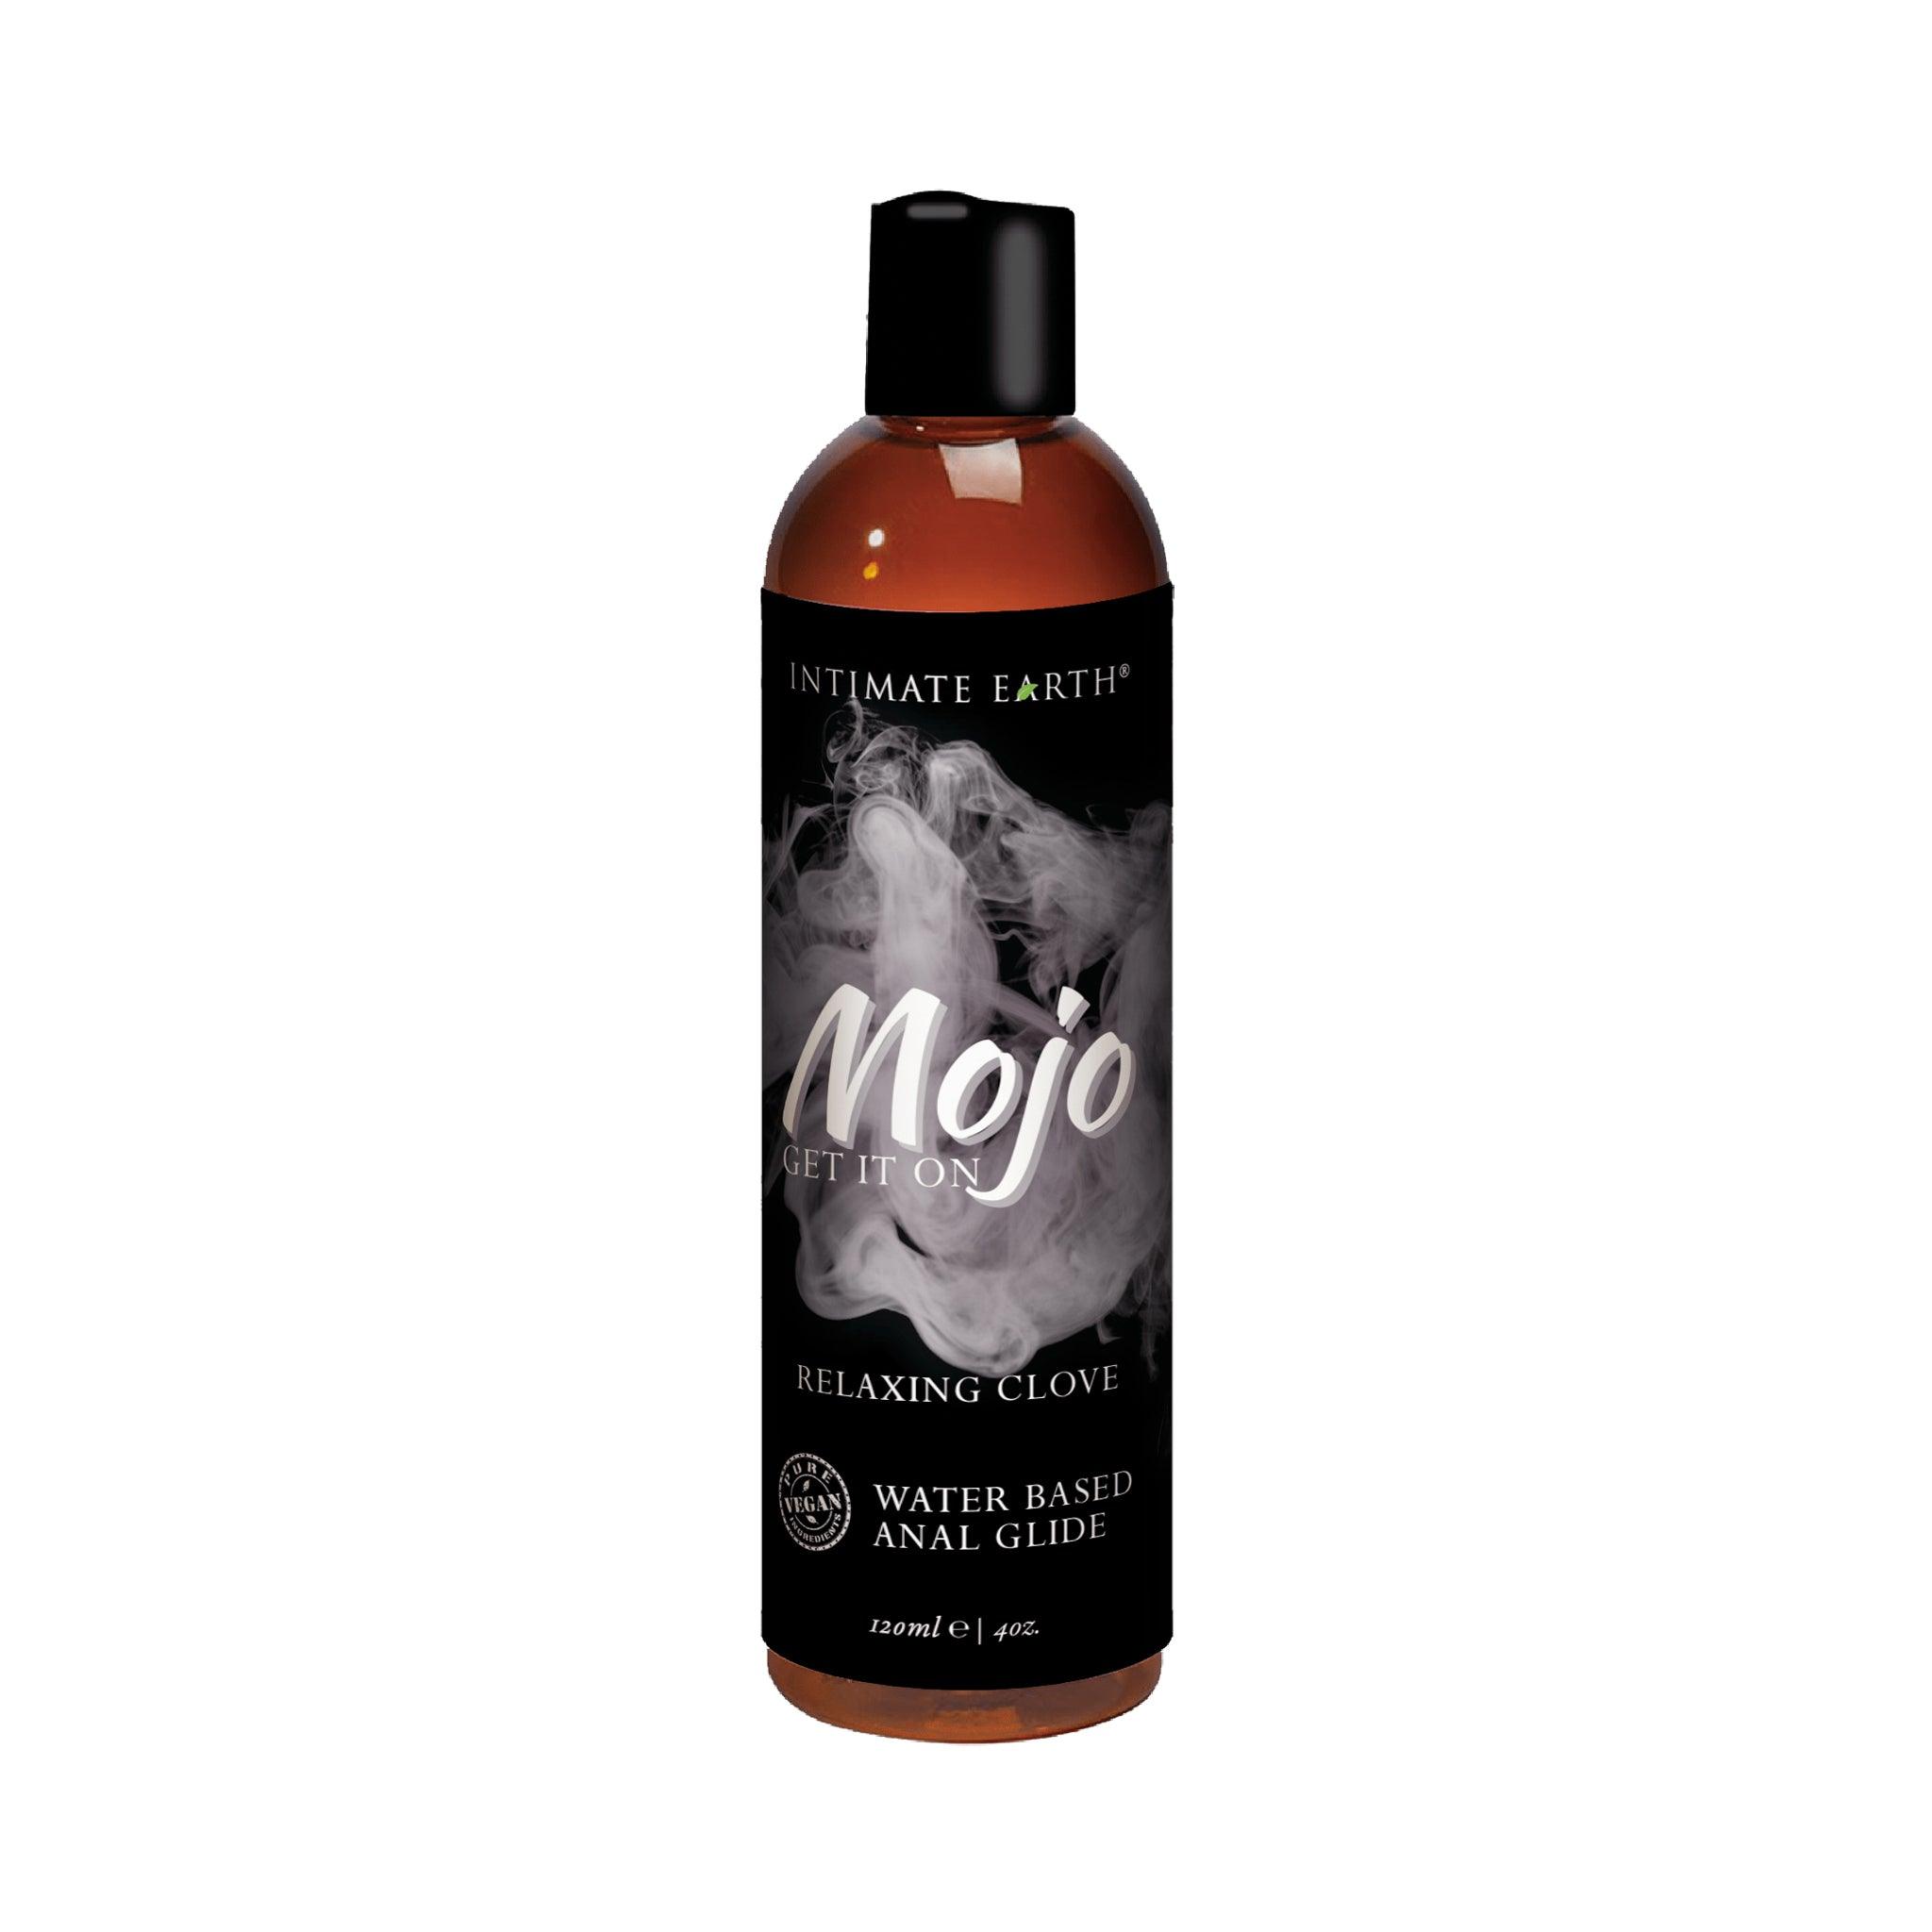 Intimate Earth MOJO Water-based Anal Relaxing Glide 4 oz (120 mL) - CheapLubes.com